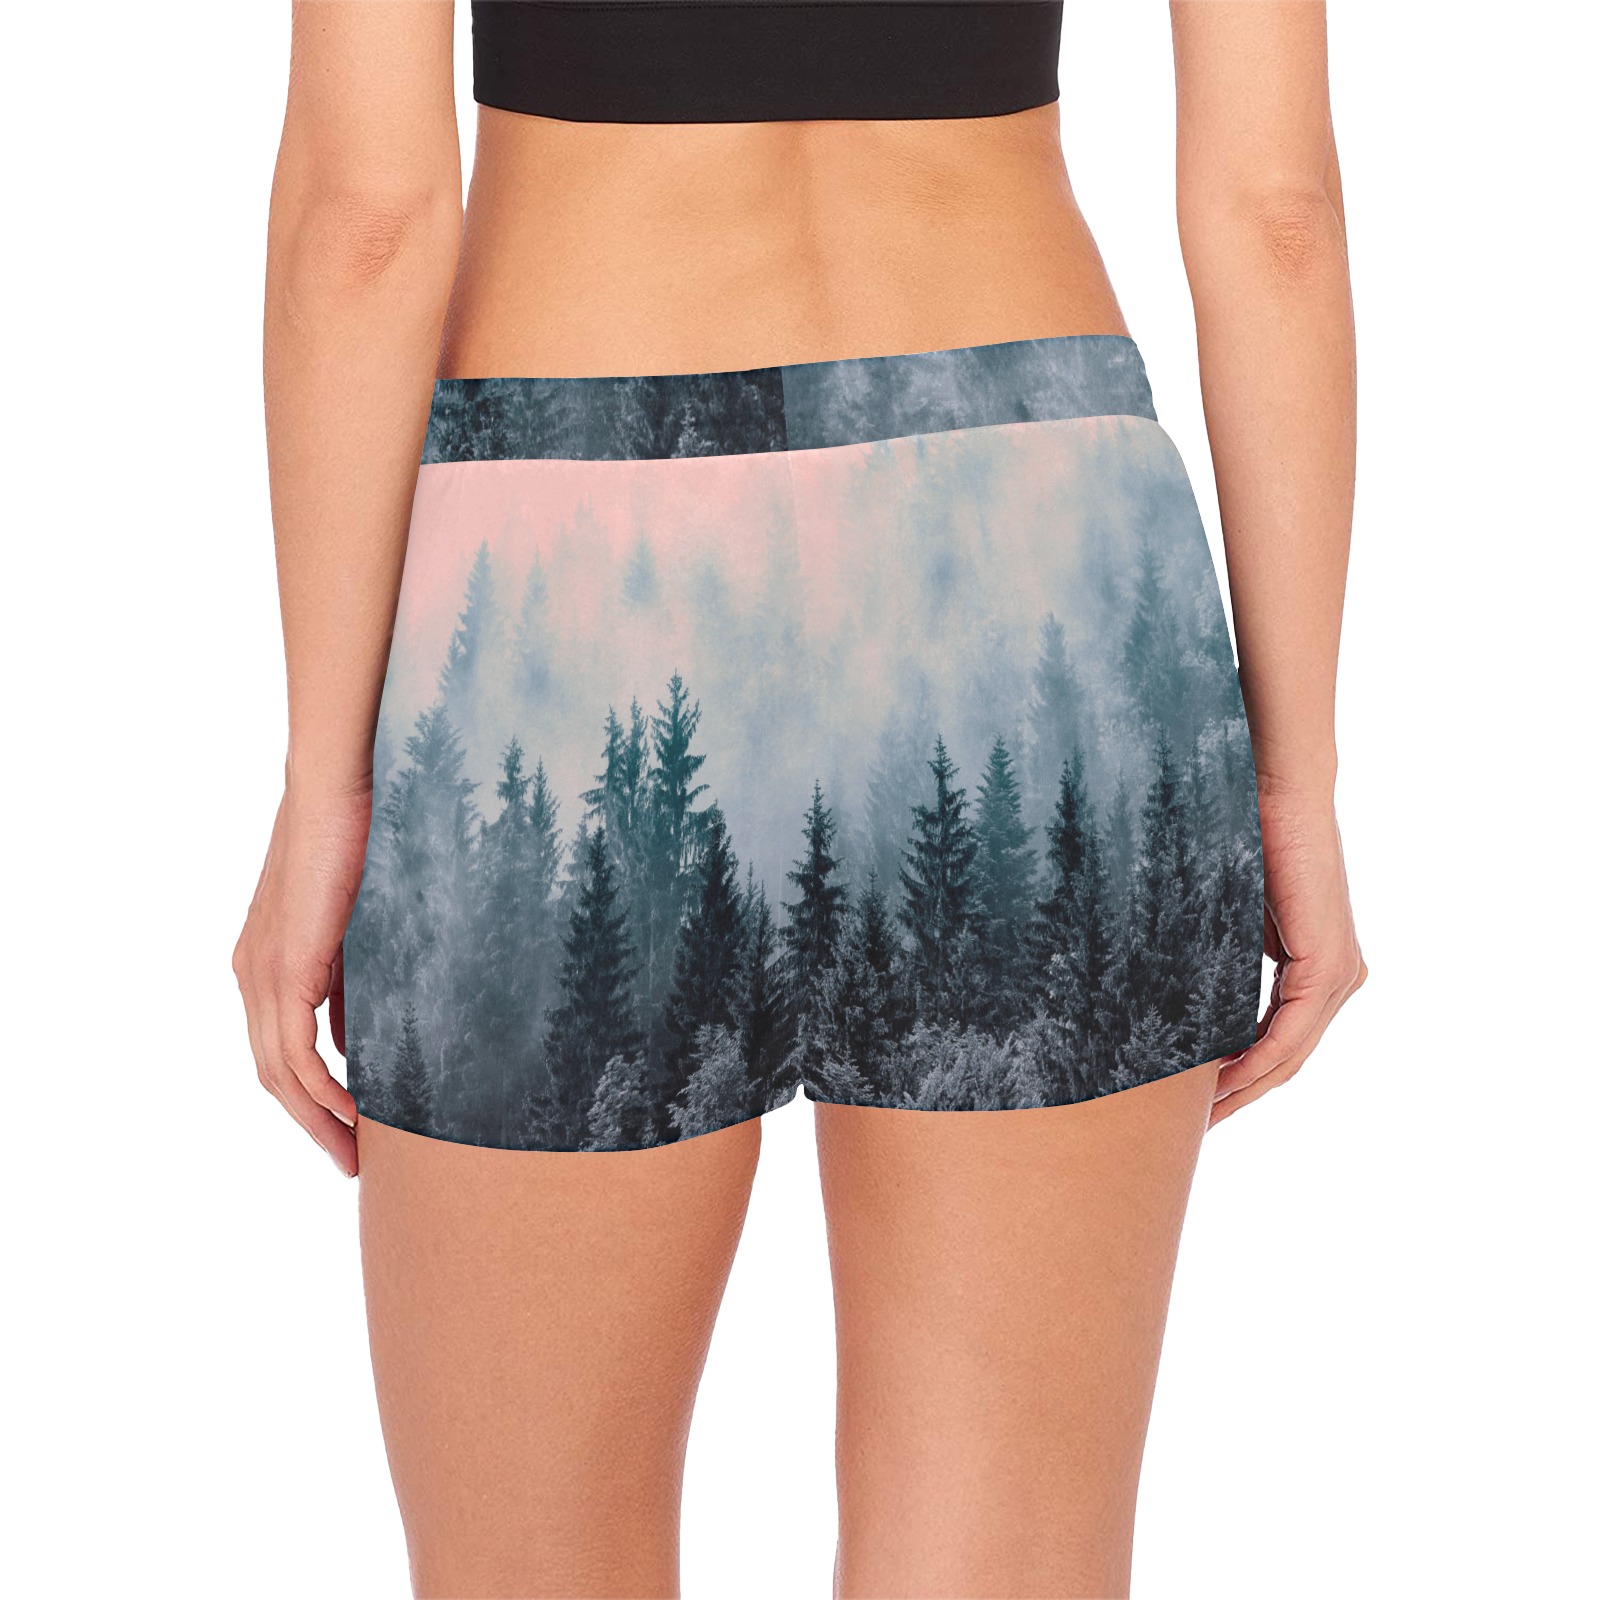 Landscape forest pink and gray Women's Pajama Shorts